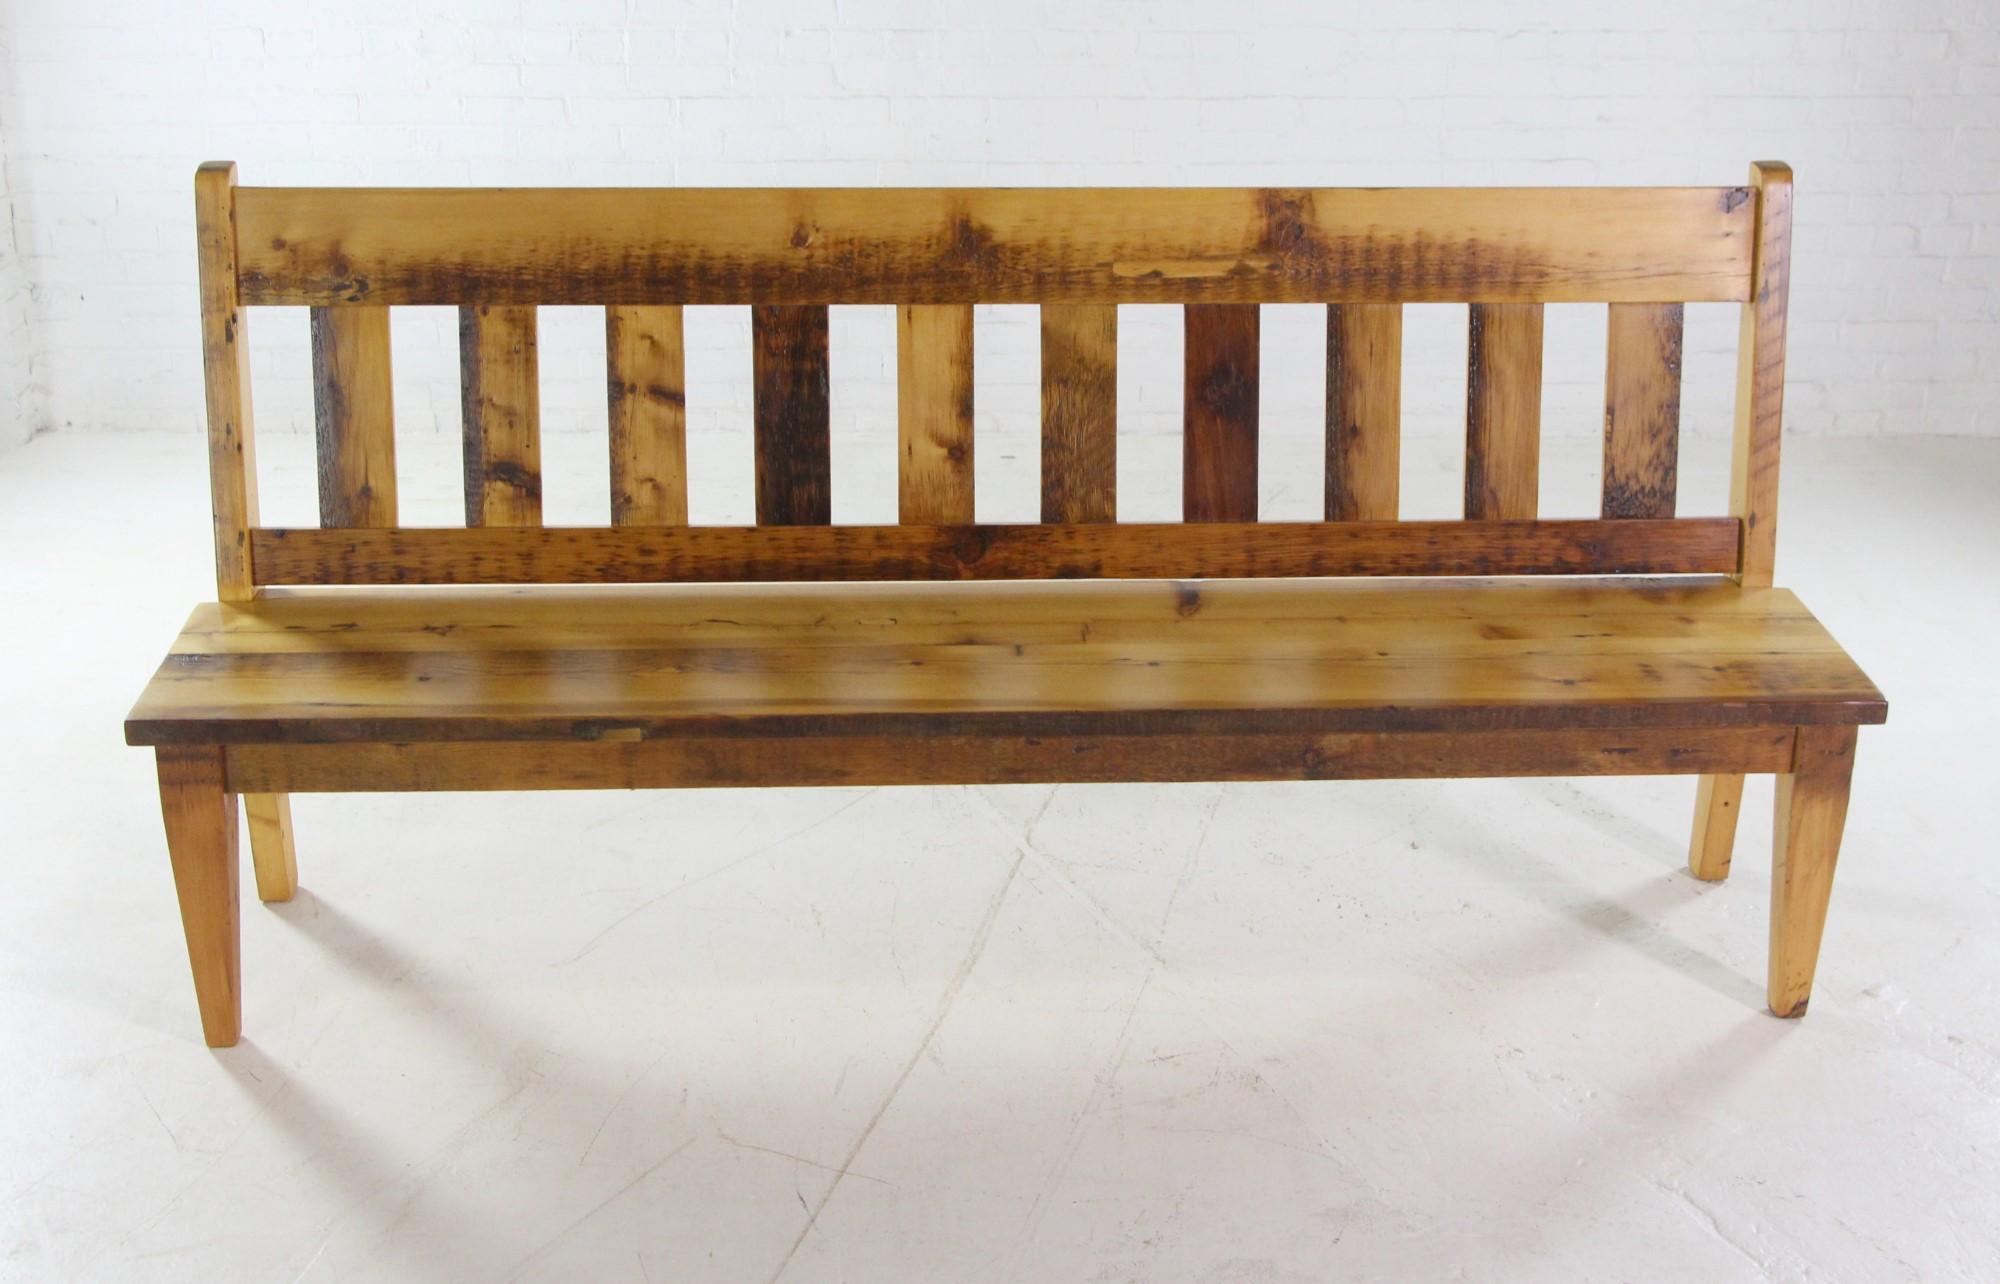 Made from old pine floor joists from old Brooklyn brownstones and factories, this upcycled bench comes with a natural stain and clear coat finish. This can be seen at our 333 West 52nd St location in the Theater District West of Manhattan.